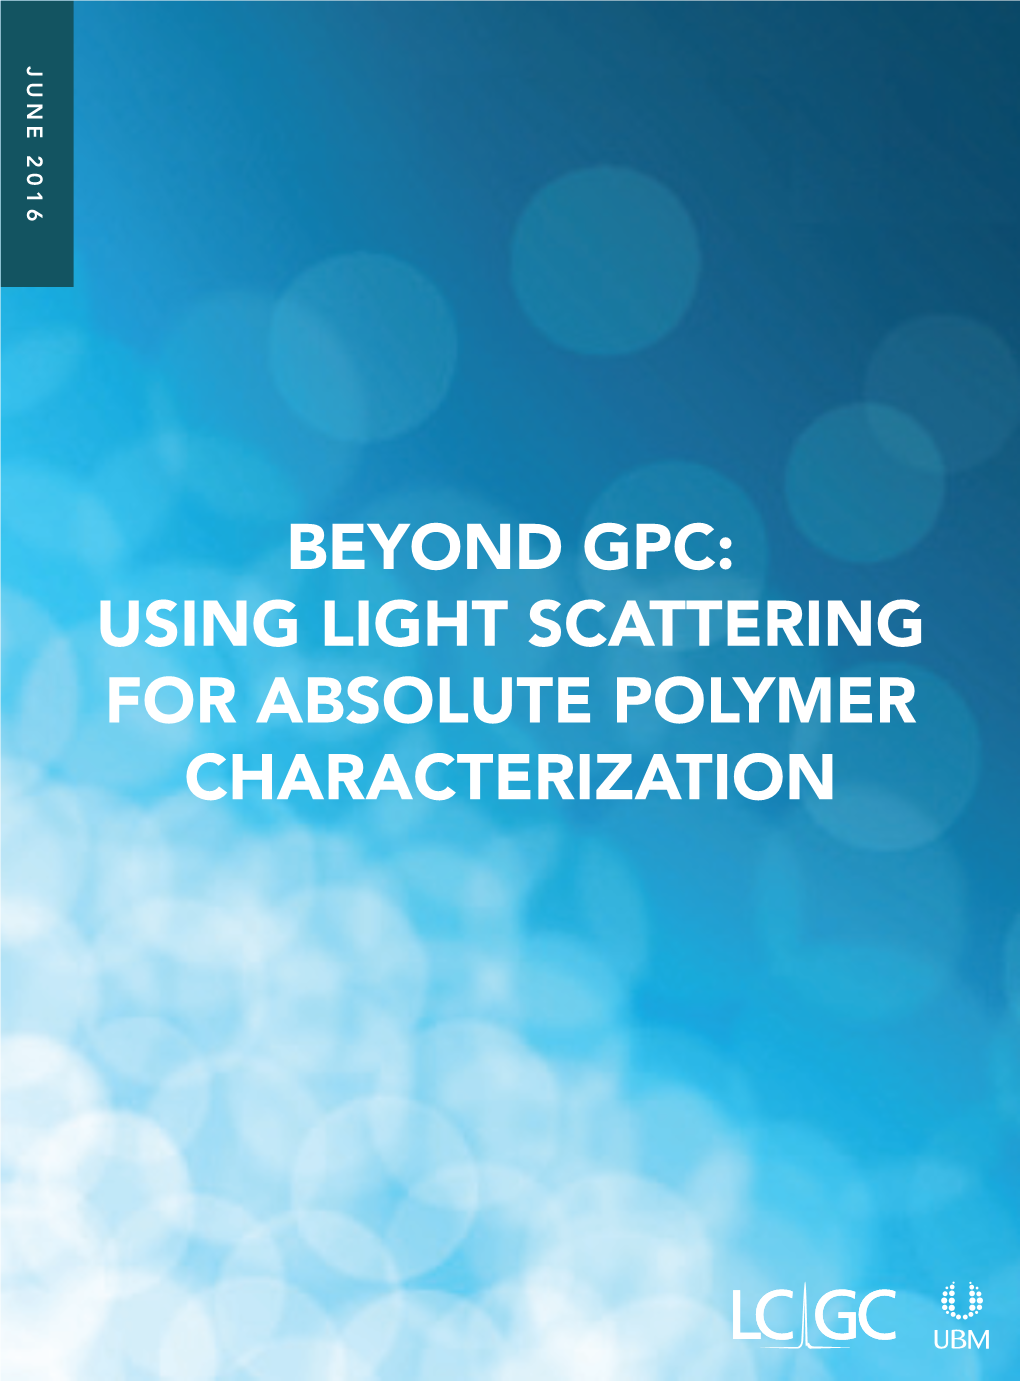 Beyond GPC Light Scattering for Absolute Polymer